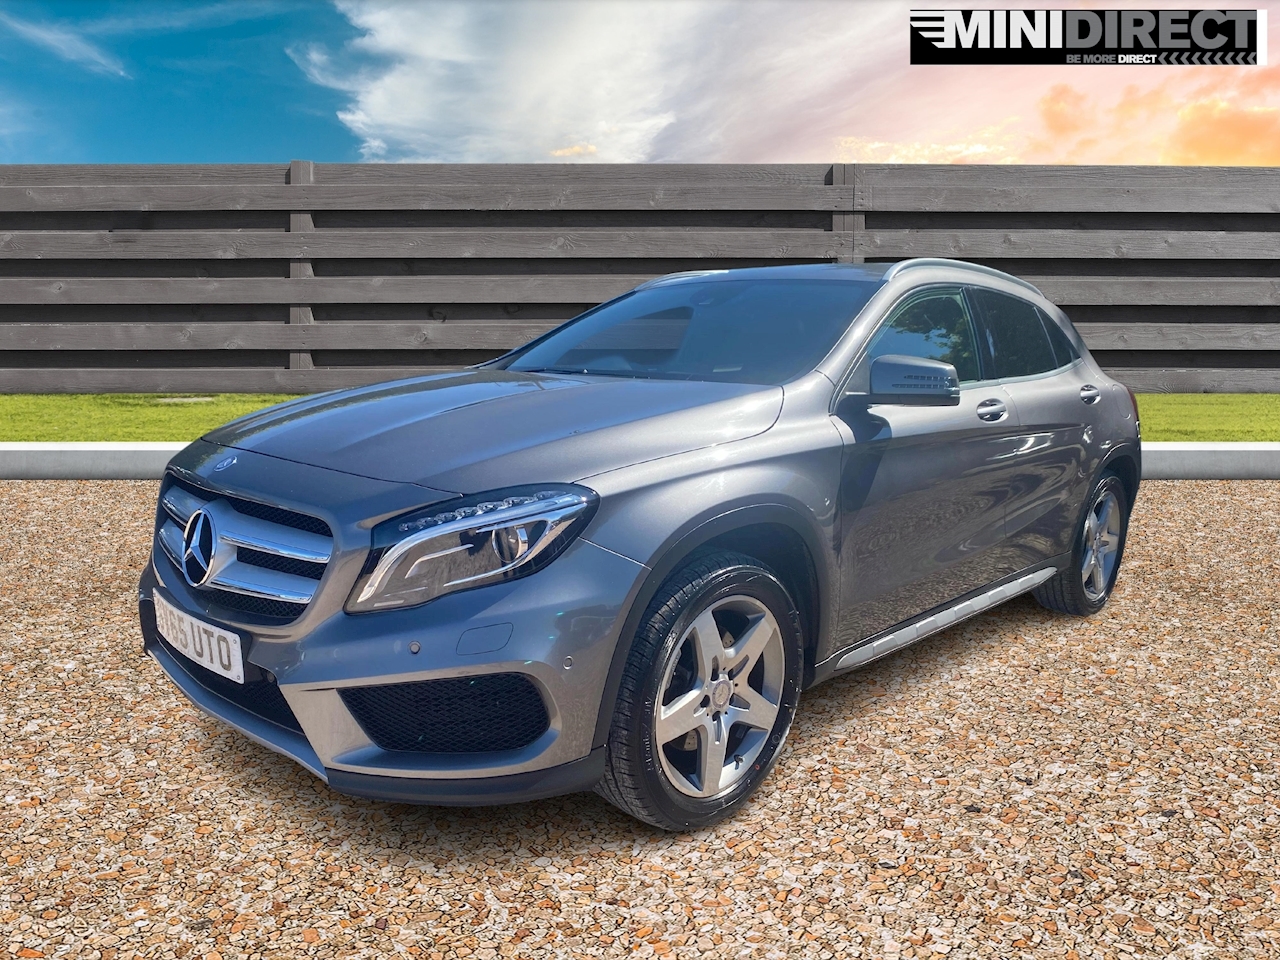 2.1 GLA220 CDI Sport SUV 5dr Diesel 7G-DCT 4MATIC Euro 6 (s/s) (170 ps)